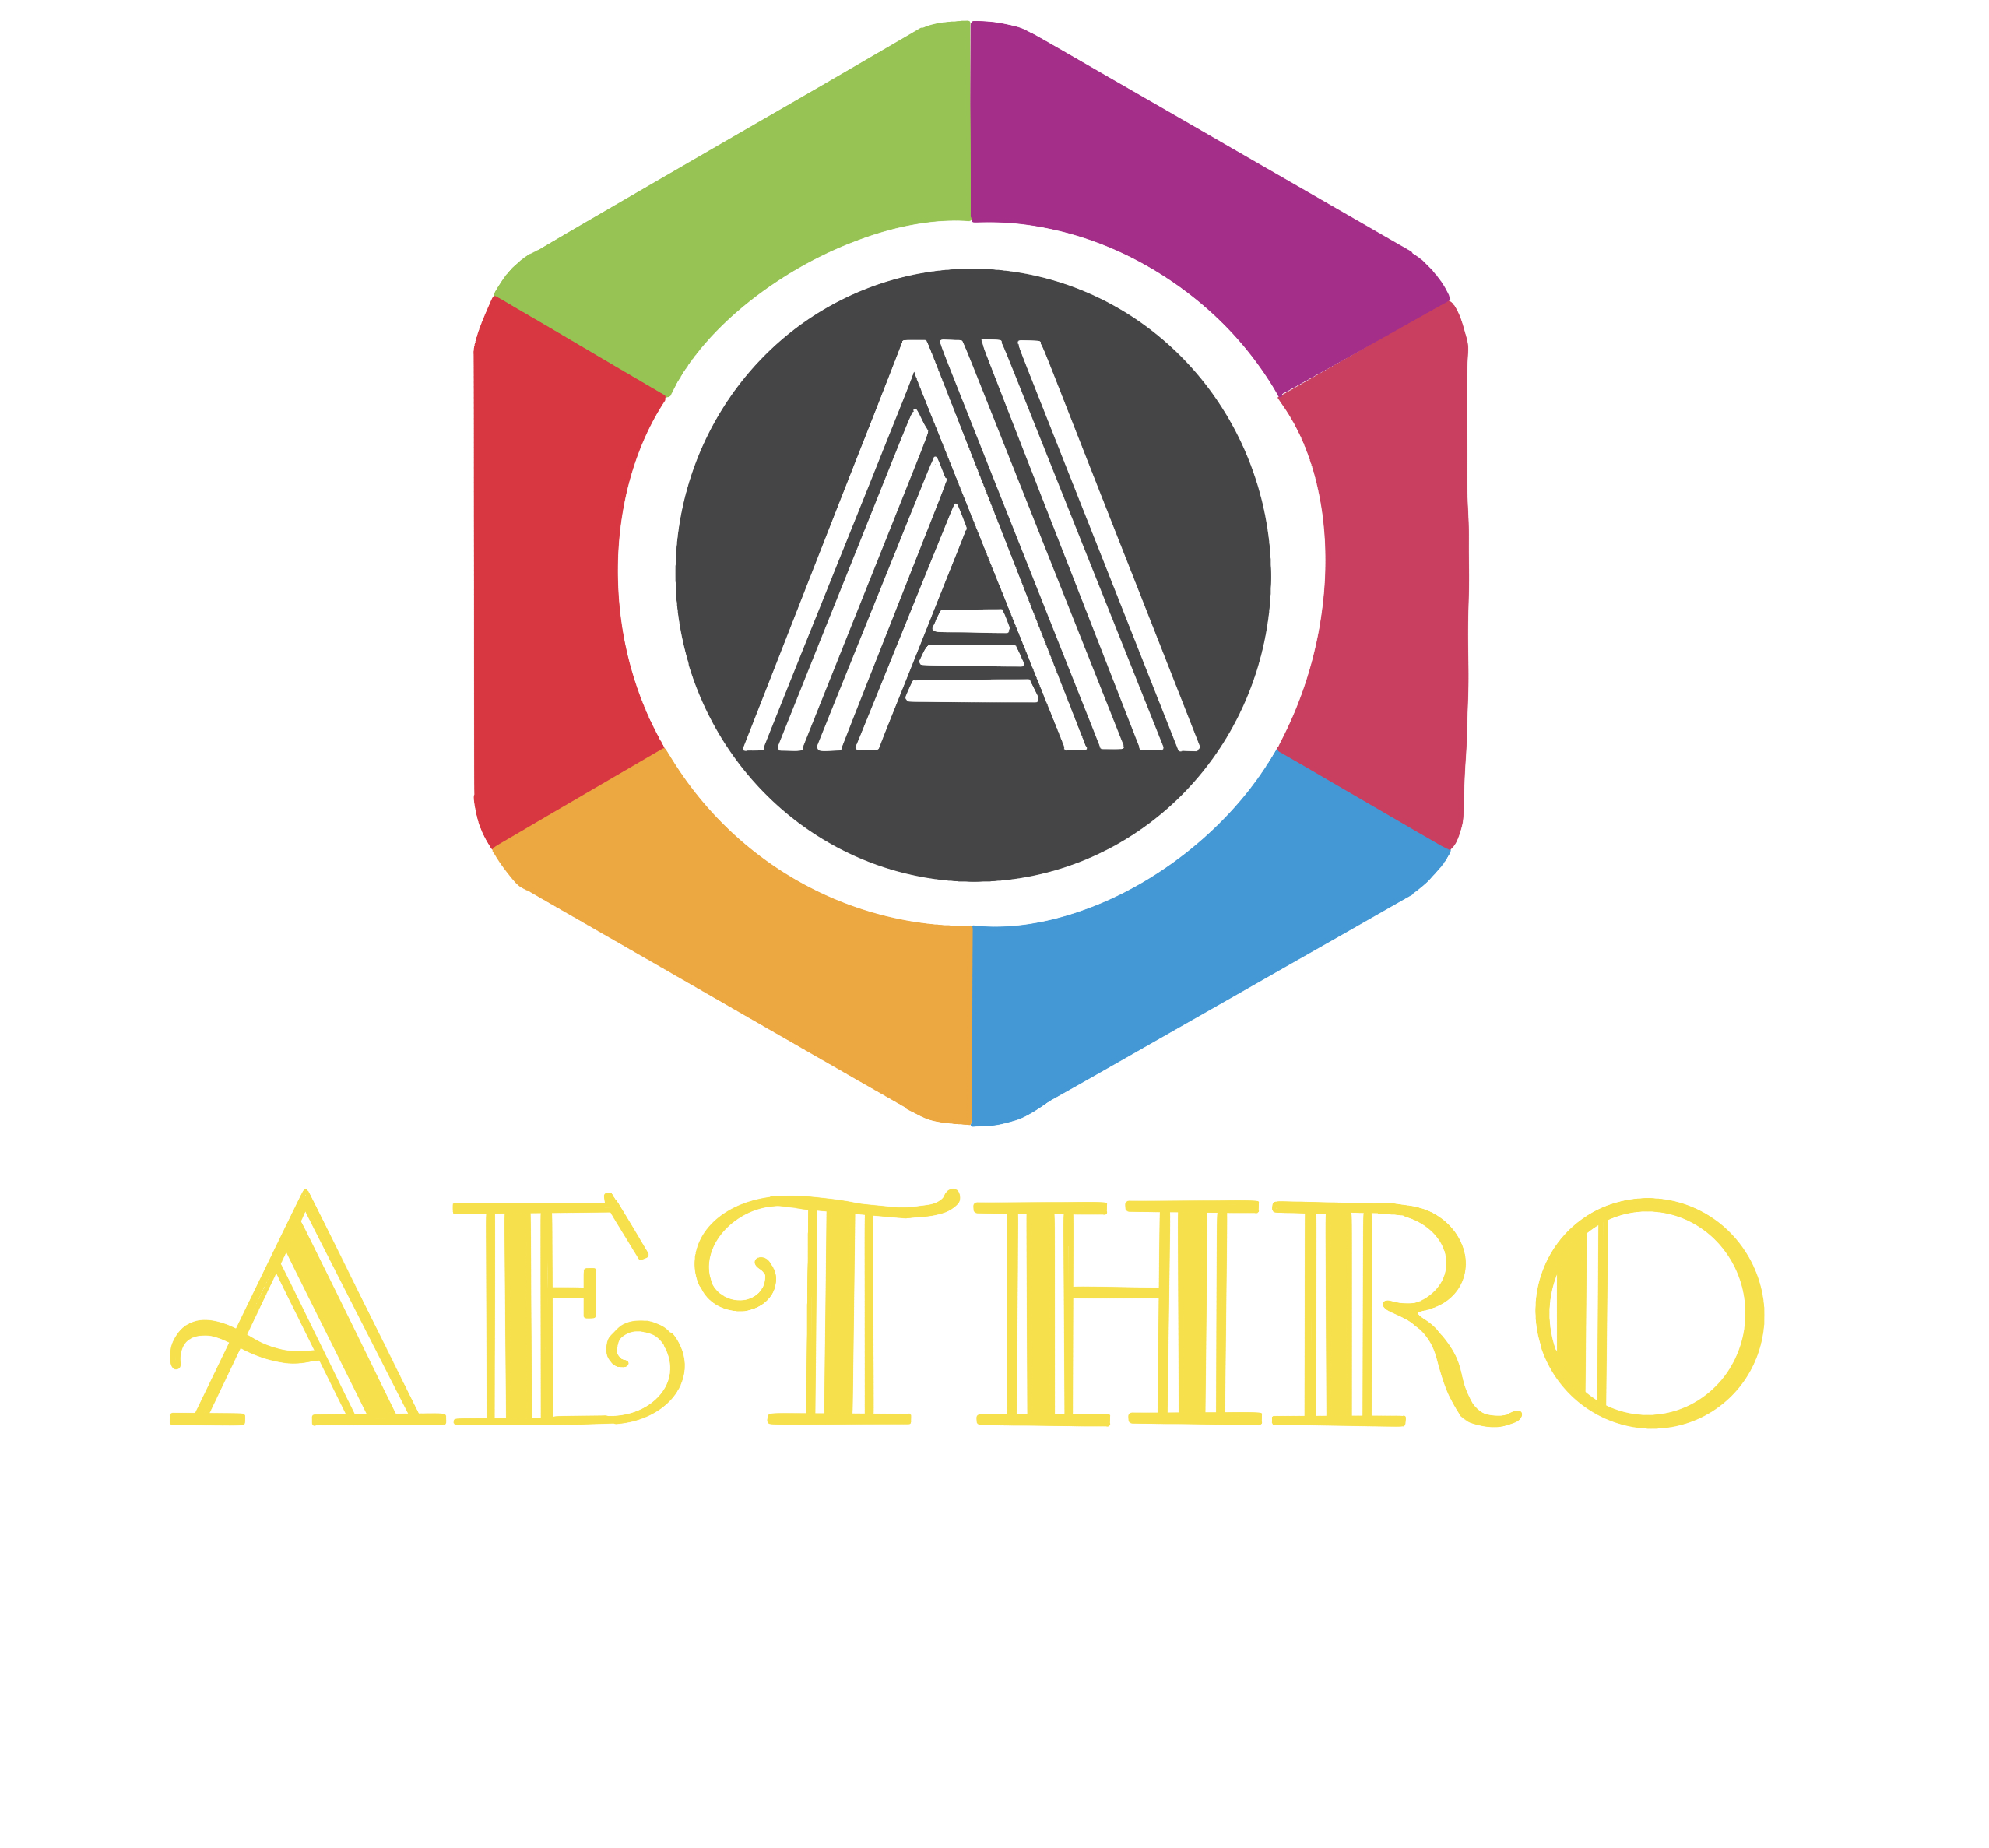 More information about "Aethro Estate Birthday Sale!"